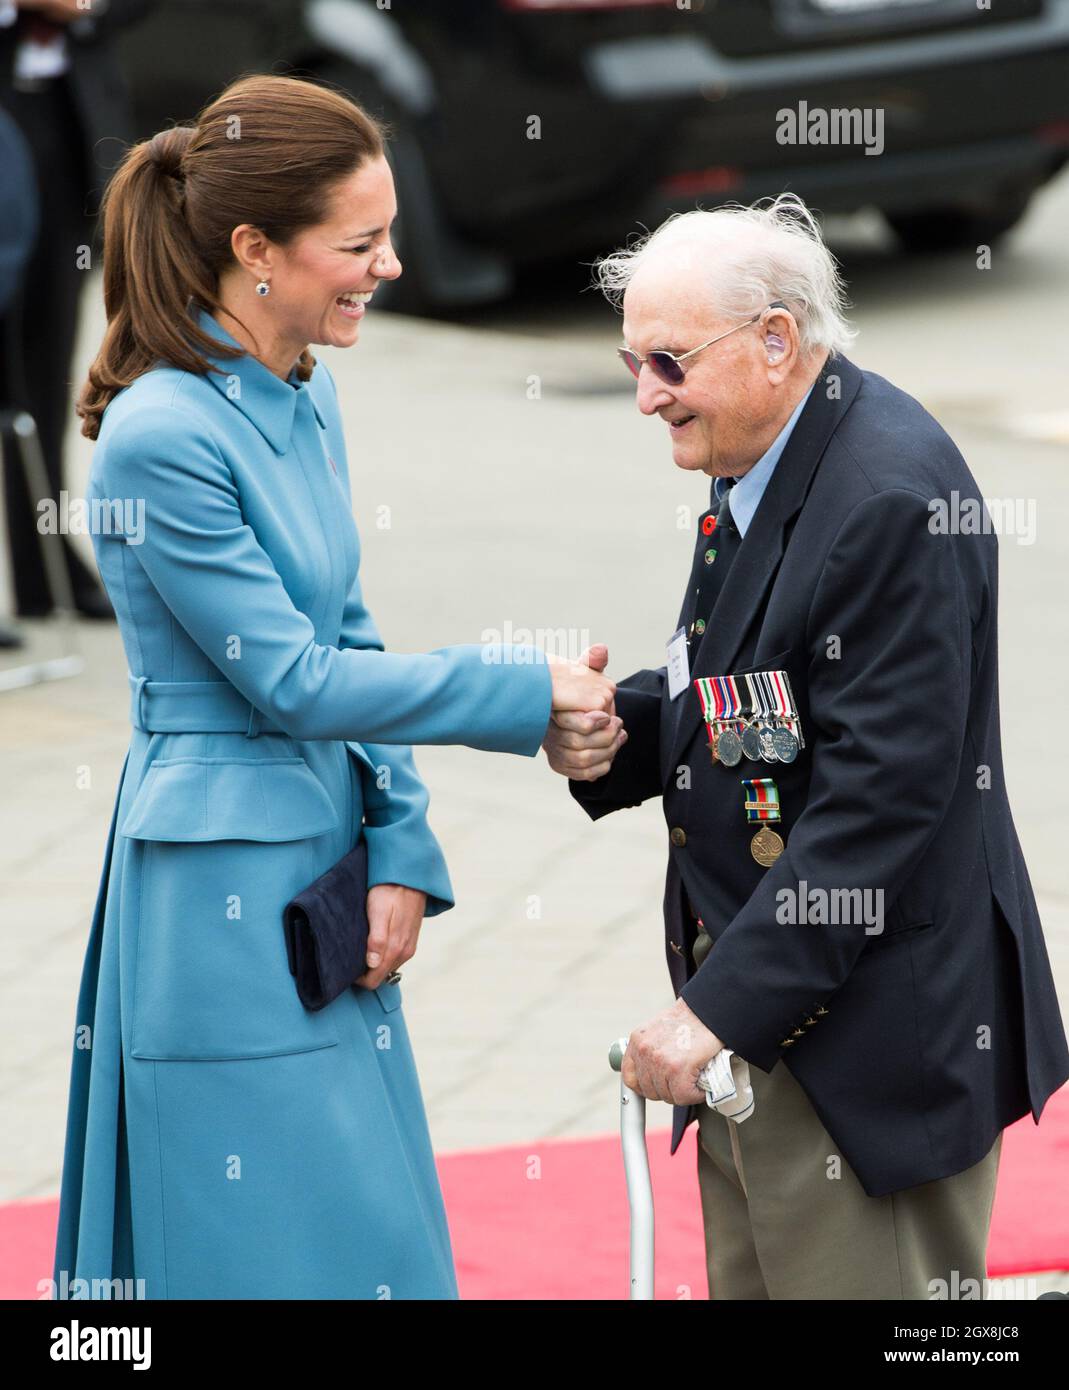 Catherine, Duchess of Cambridge shakes hands with a war veteran during a wreath-laying ceremony and commemoration in Seymour Square, Blenheim, New Zealand on April 10, 2014. The Duchess is wearing a blue coat dress by designer Alexander McQueen. Stock Photo